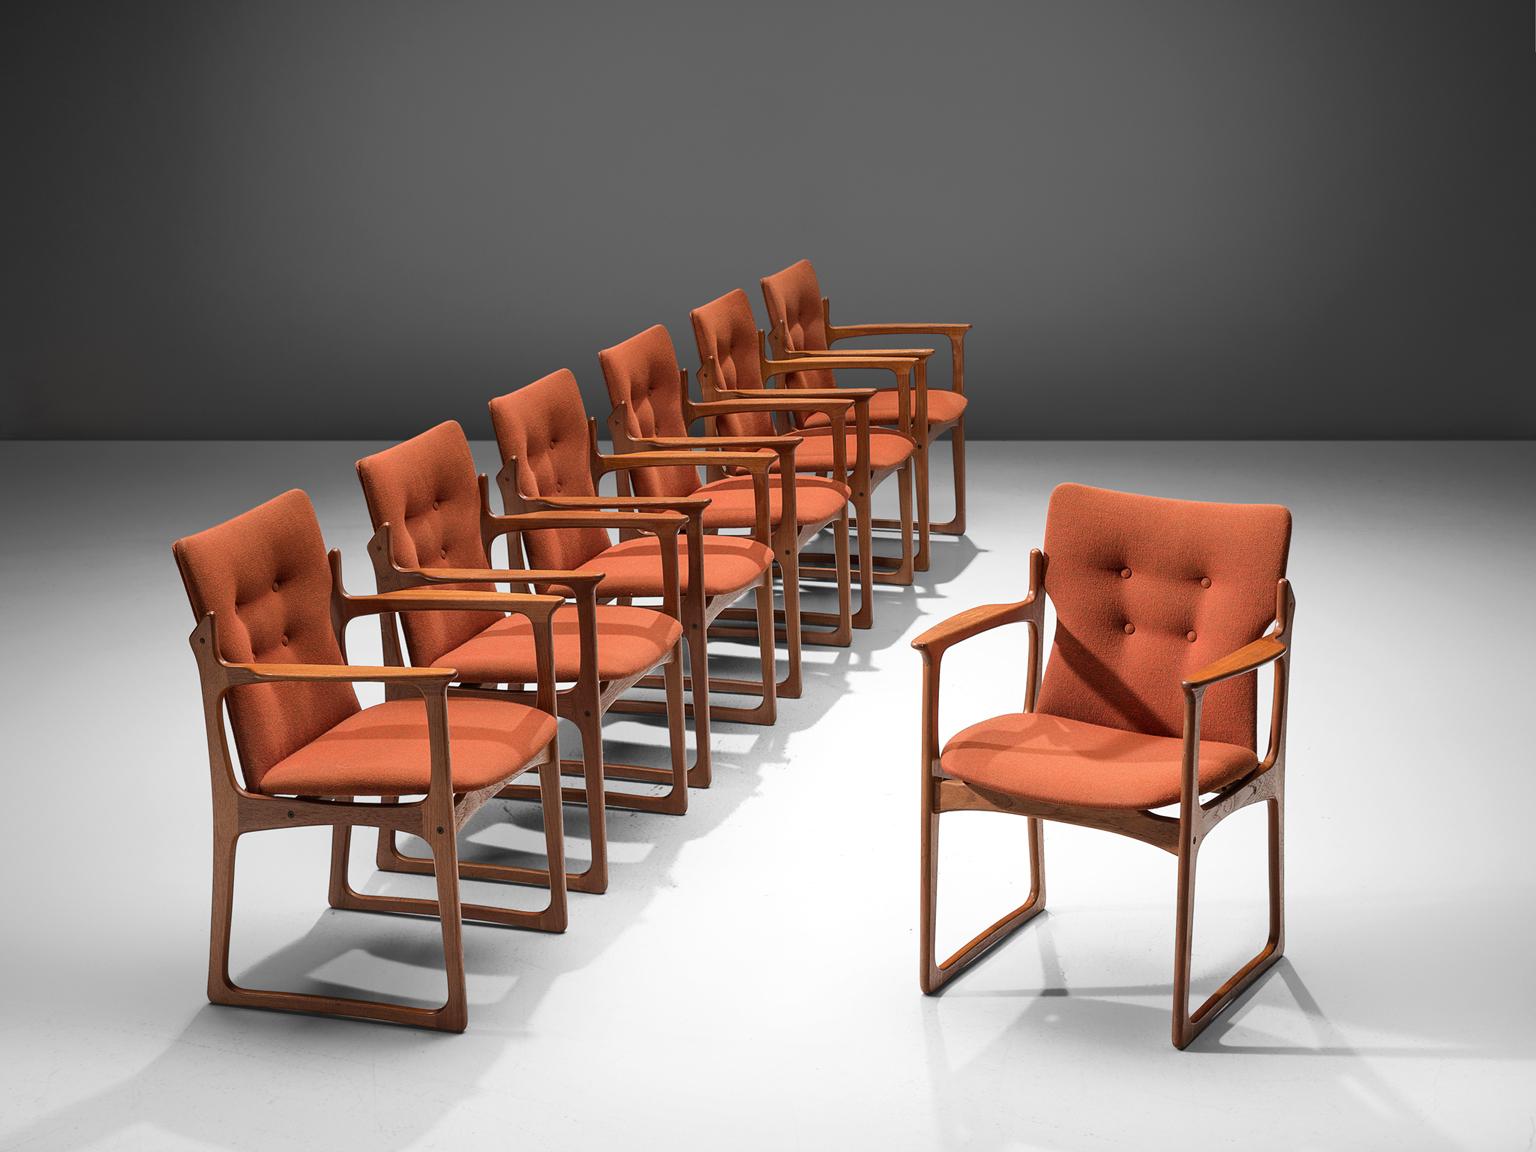 Vamdrup Stolefabrik, model 'VS 231', set of seven armchairs, teak and orange fabric, Denmark, 1960s. 

The armchairs with a solid teak frame, raise a handsome original orange upholstery seat. The frame shows subtle lines and beautiful curves of the